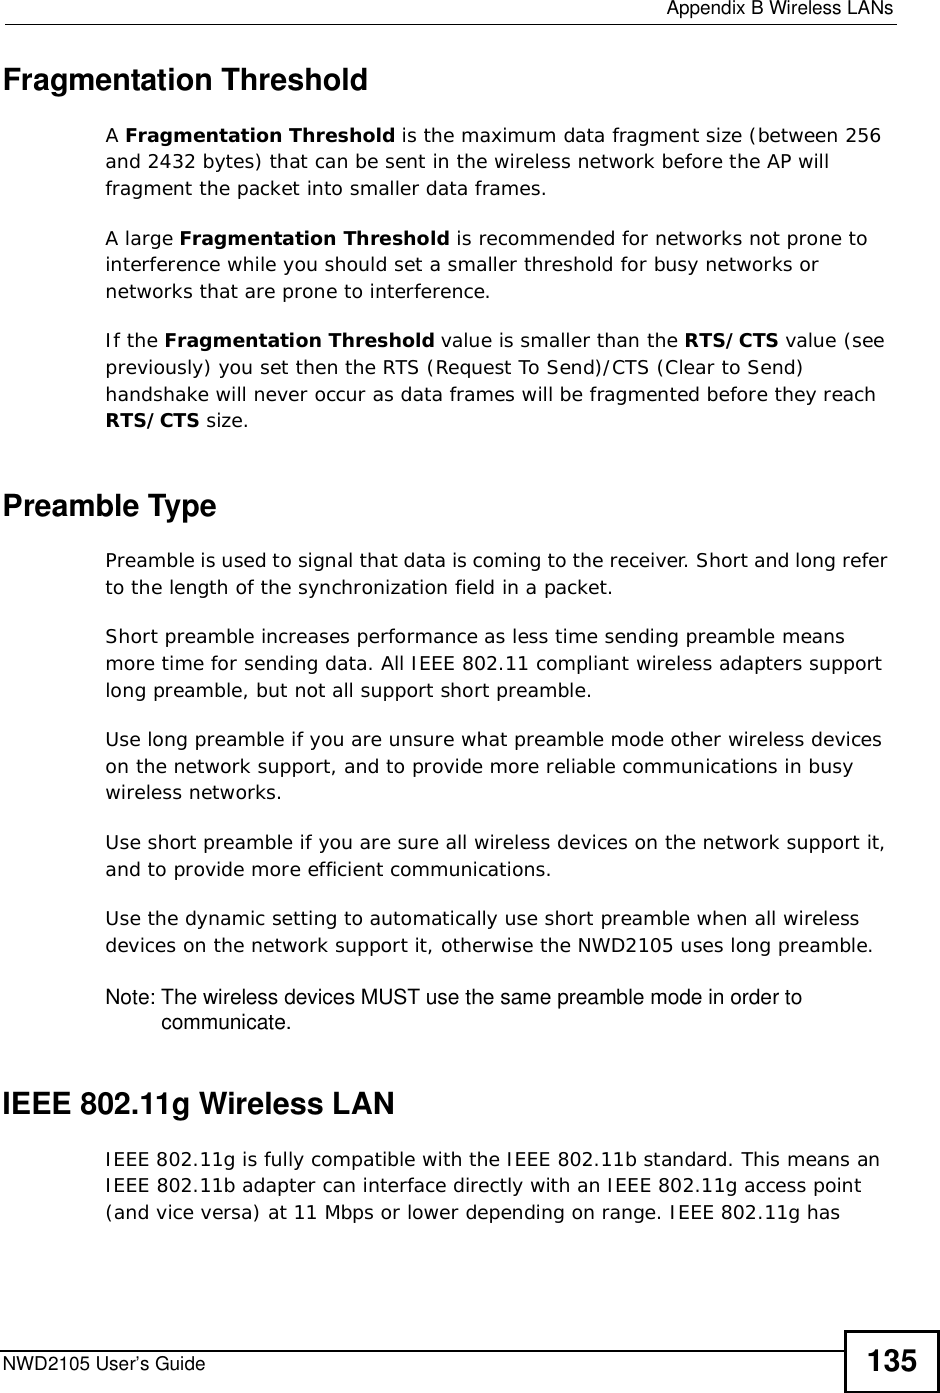  Appendix BWireless LANsNWD2105 User’s Guide 135Fragmentation ThresholdAFragmentation Threshold is the maximum data fragment size (between 256 and 2432 bytes) that can be sent in the wireless network before the AP will fragment the packet into smaller data frames.A large Fragmentation Threshold is recommended for networks not prone to interference while you should set a smaller threshold for busy networks or networks that are prone to interference.If the Fragmentation Threshold value is smaller than the RTS/CTS value (see previously) you set then the RTS (Request To Send)/CTS (Clear to Send) handshake will never occur as data frames will be fragmented before they reach RTS/CTS size.Preamble TypePreamble is used to signal that data is coming to the receiver. Short and long refer to the length of the synchronization field in a packet.Short preamble increases performance as less time sending preamble means more time for sending data. All IEEE 802.11 compliant wireless adapters support long preamble, but not all support short preamble. Use long preamble if you are unsure what preamble mode other wireless devices on the network support, and to provide more reliable communications in busy wireless networks. Use short preamble if you are sure all wireless devices on the network support it, and to provide more efficient communications.Use the dynamic setting to automatically use short preamble when all wireless devices on the network support it, otherwise the NWD2105 uses long preamble.Note: The wireless devices MUSTuse the same preamble mode in order to communicate.IEEE 802.11g Wireless LANIEEE 802.11g is fully compatible with the IEEE 802.11b standard. This means an IEEE 802.11b adapter can interface directly with an IEEE 802.11g access point (and vice versa) at 11 Mbps or lower depending on range. IEEE 802.11g has 